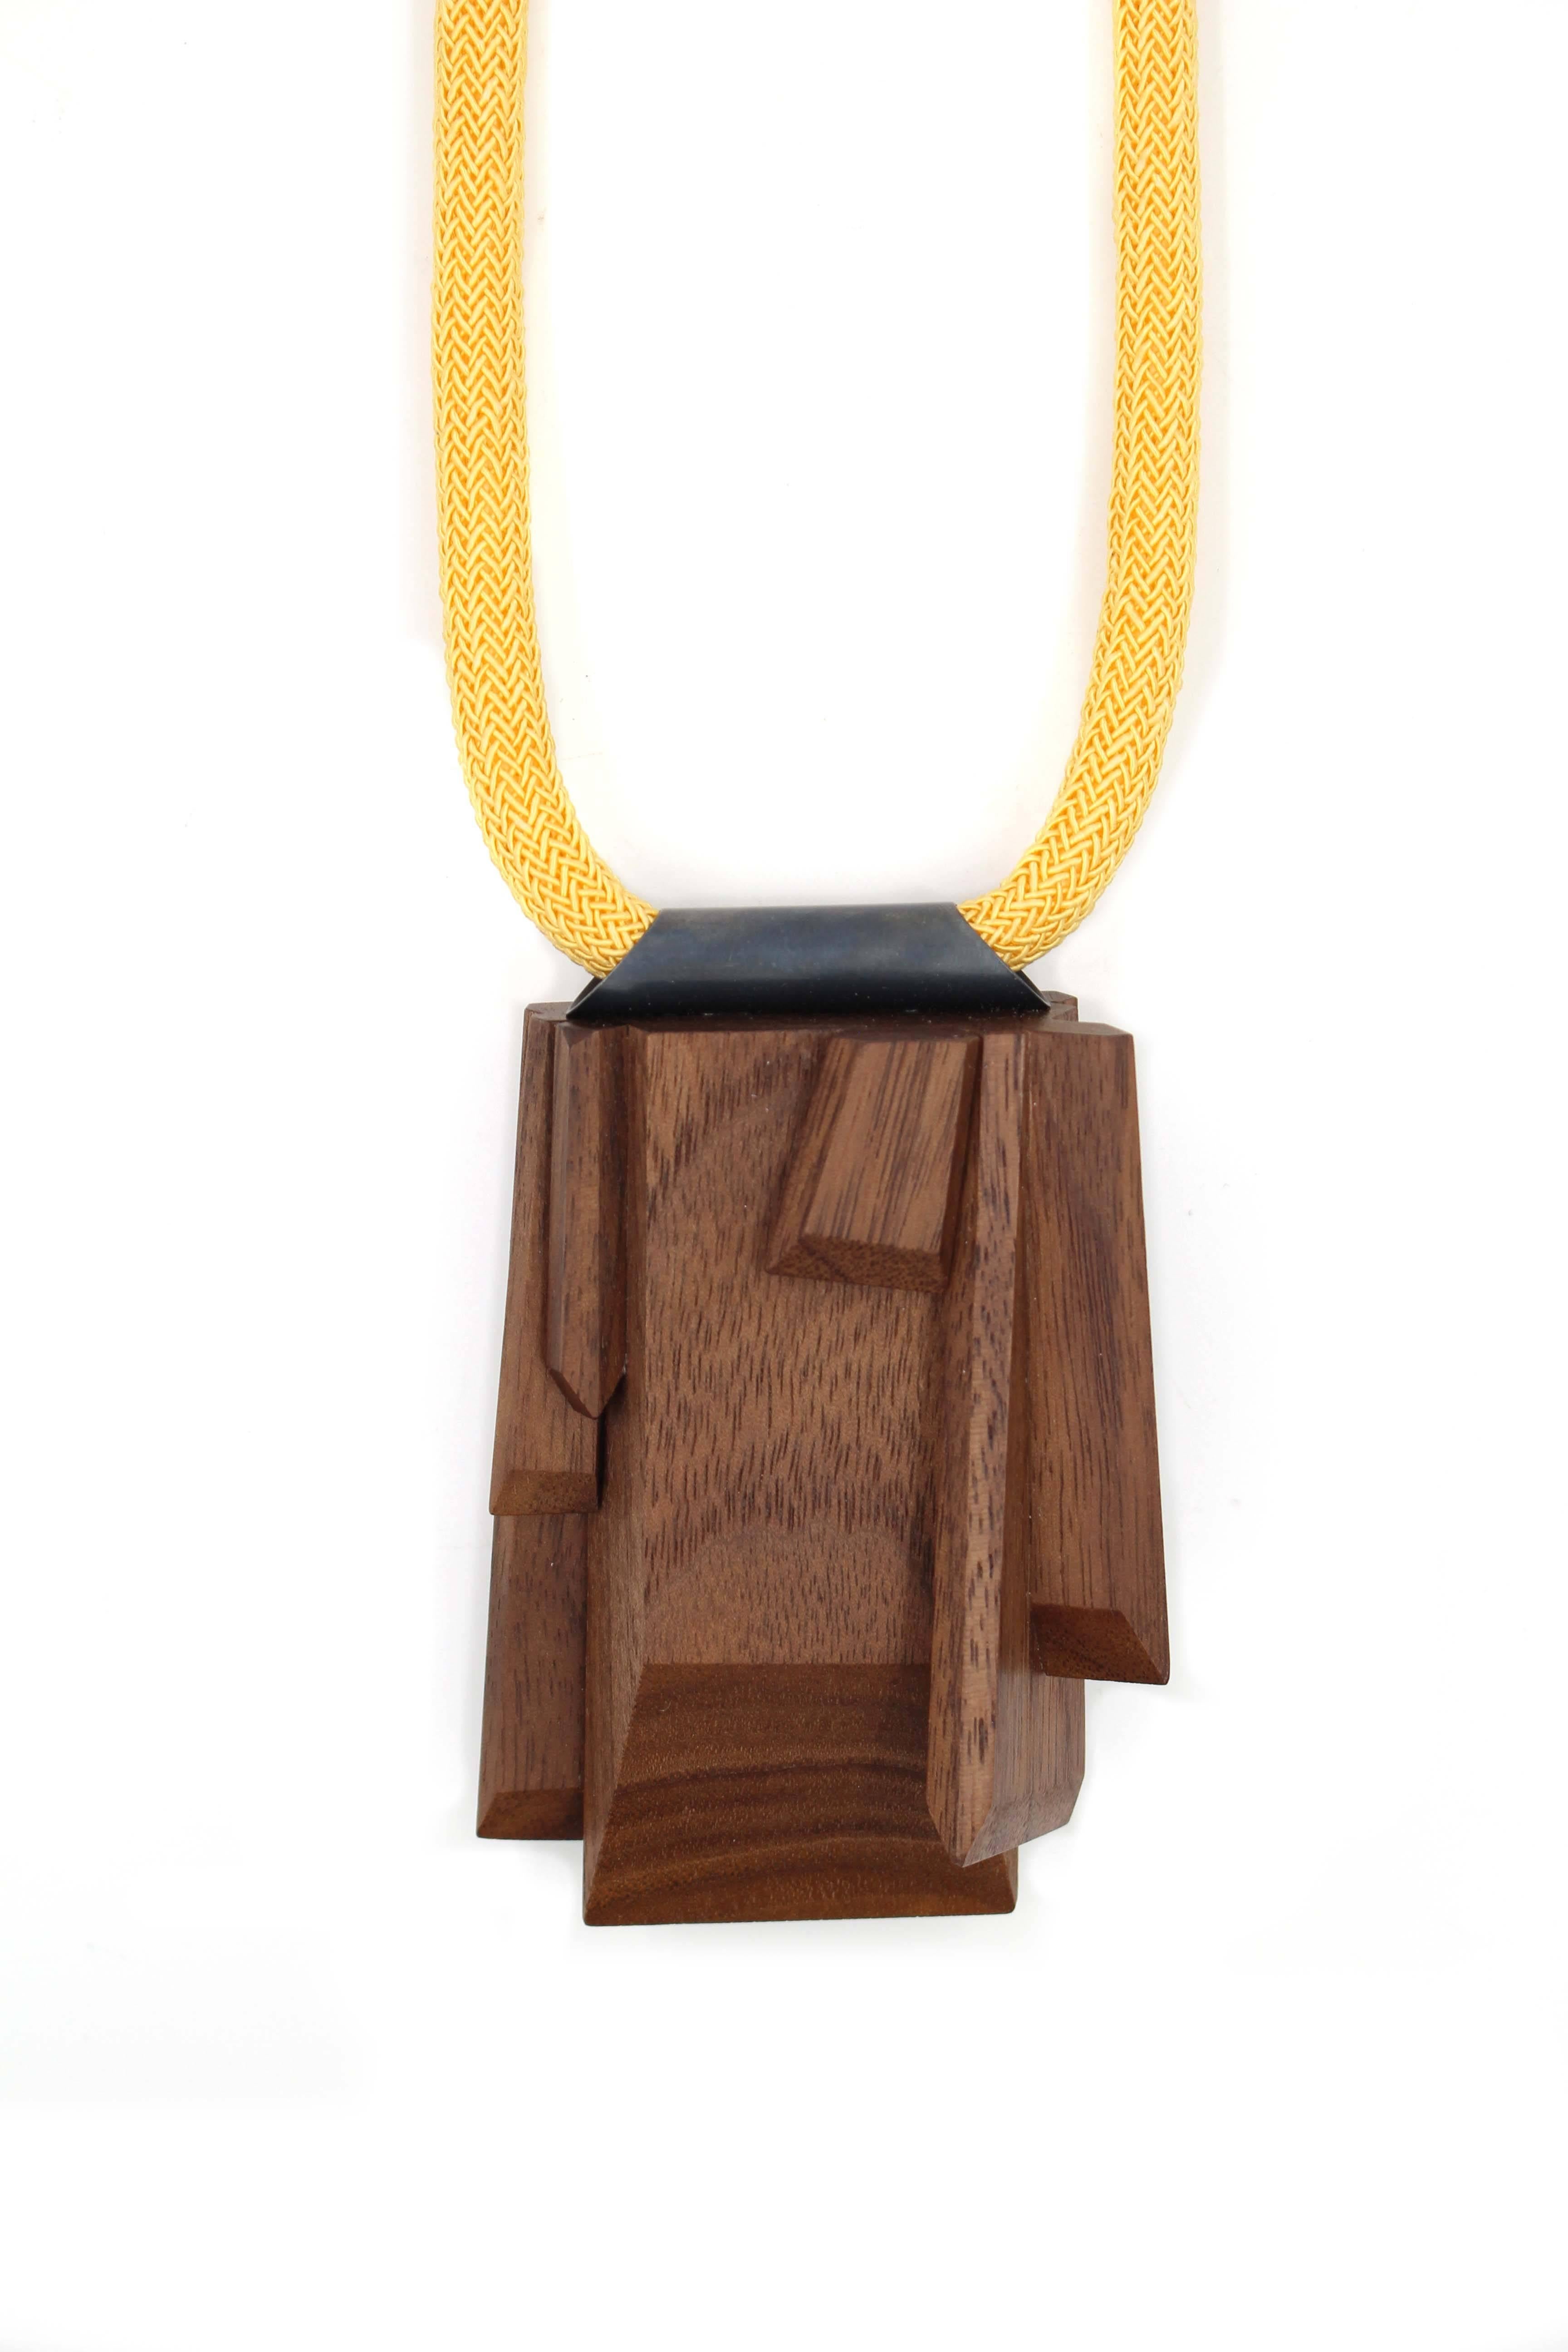 Wood Sugar Crystal Necklace  In New Condition For Sale In Santa Fe, NM